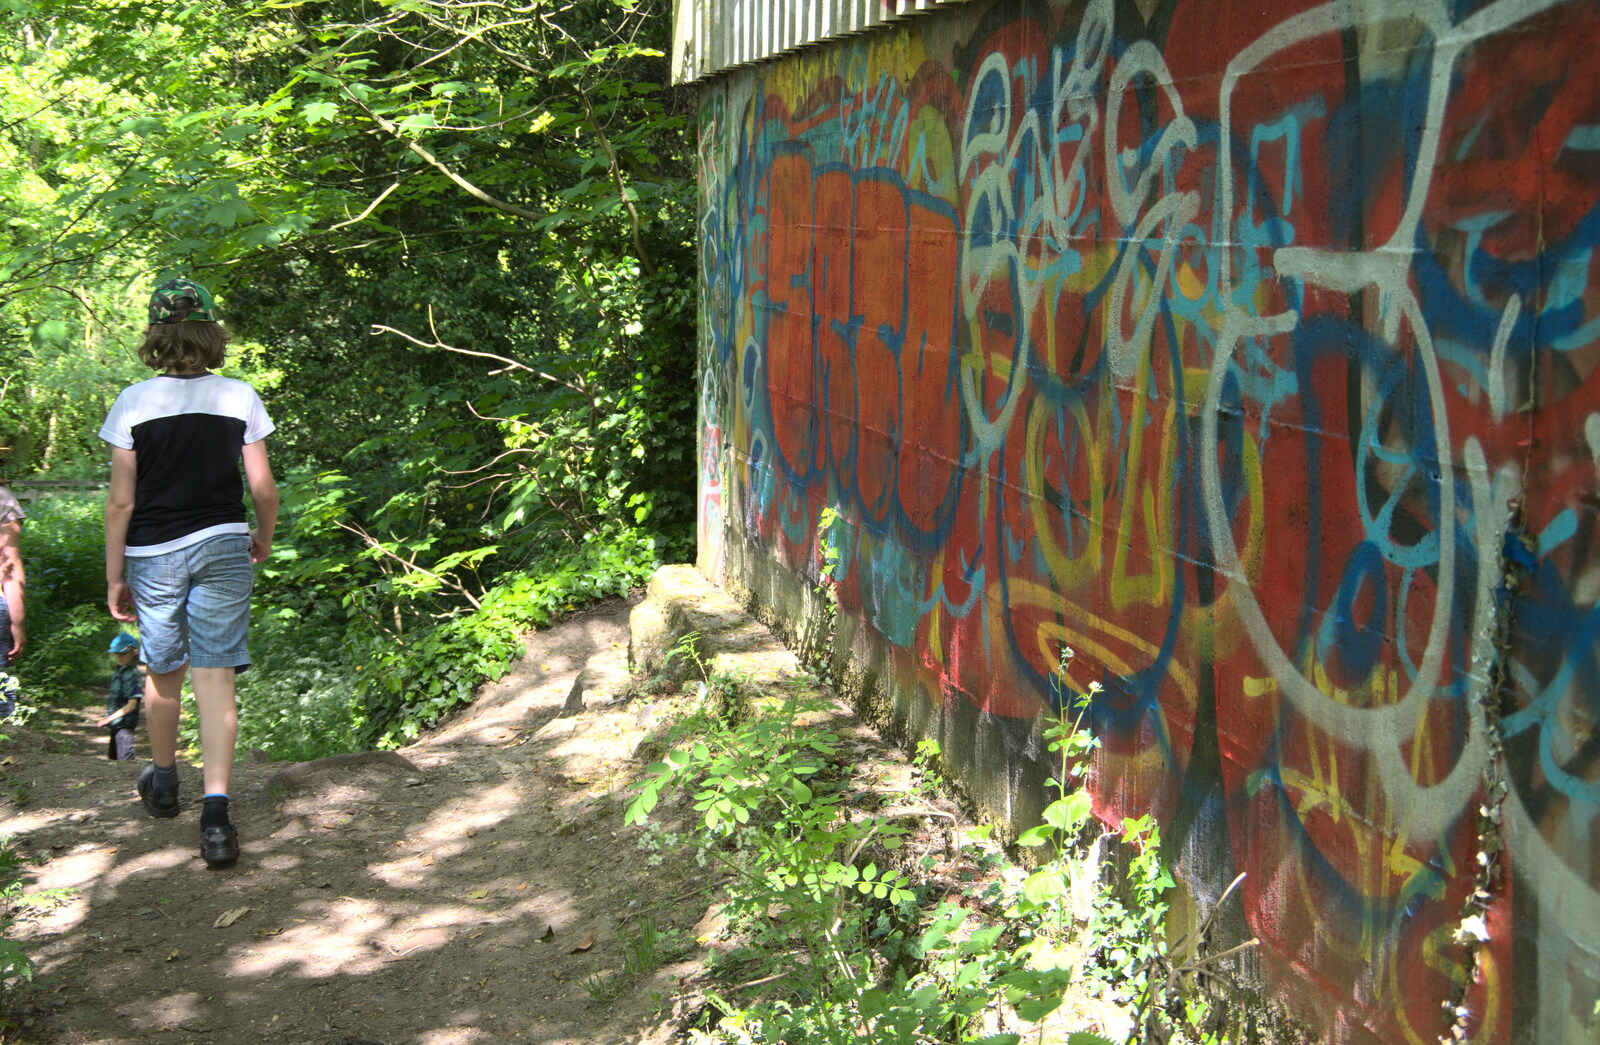 Fred walks past the chicken-factory graffiti from A Walk up Rapsy Tapsy Lane, Eye, Suffolk - 9th May 2020